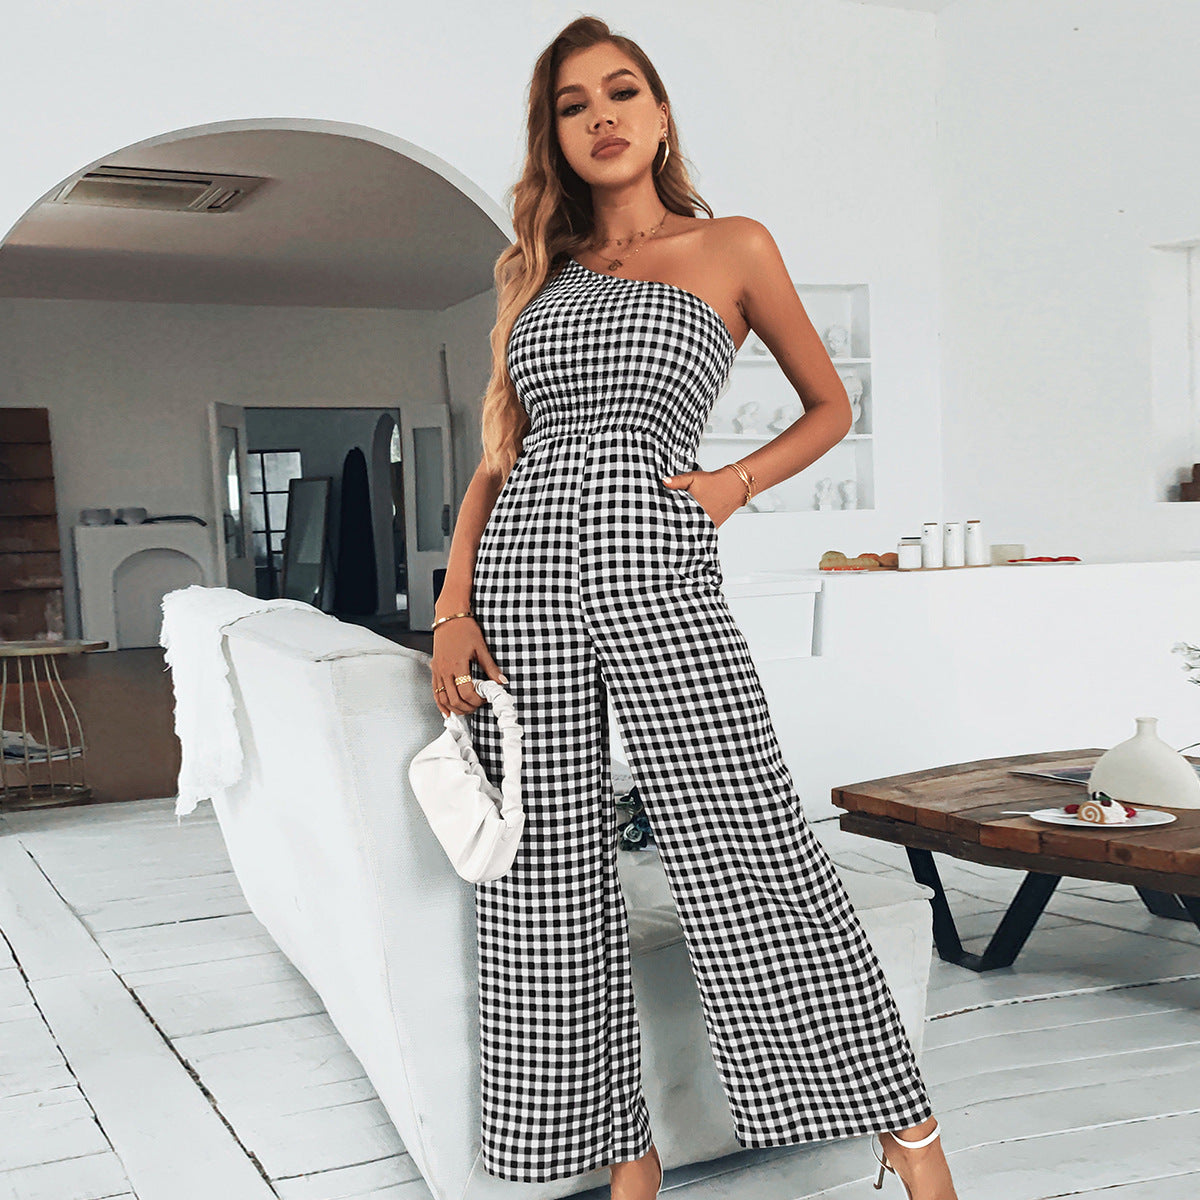 Plaid One-shoulder Top Section Smocking Temperament Polyester Women's Jumpsuit